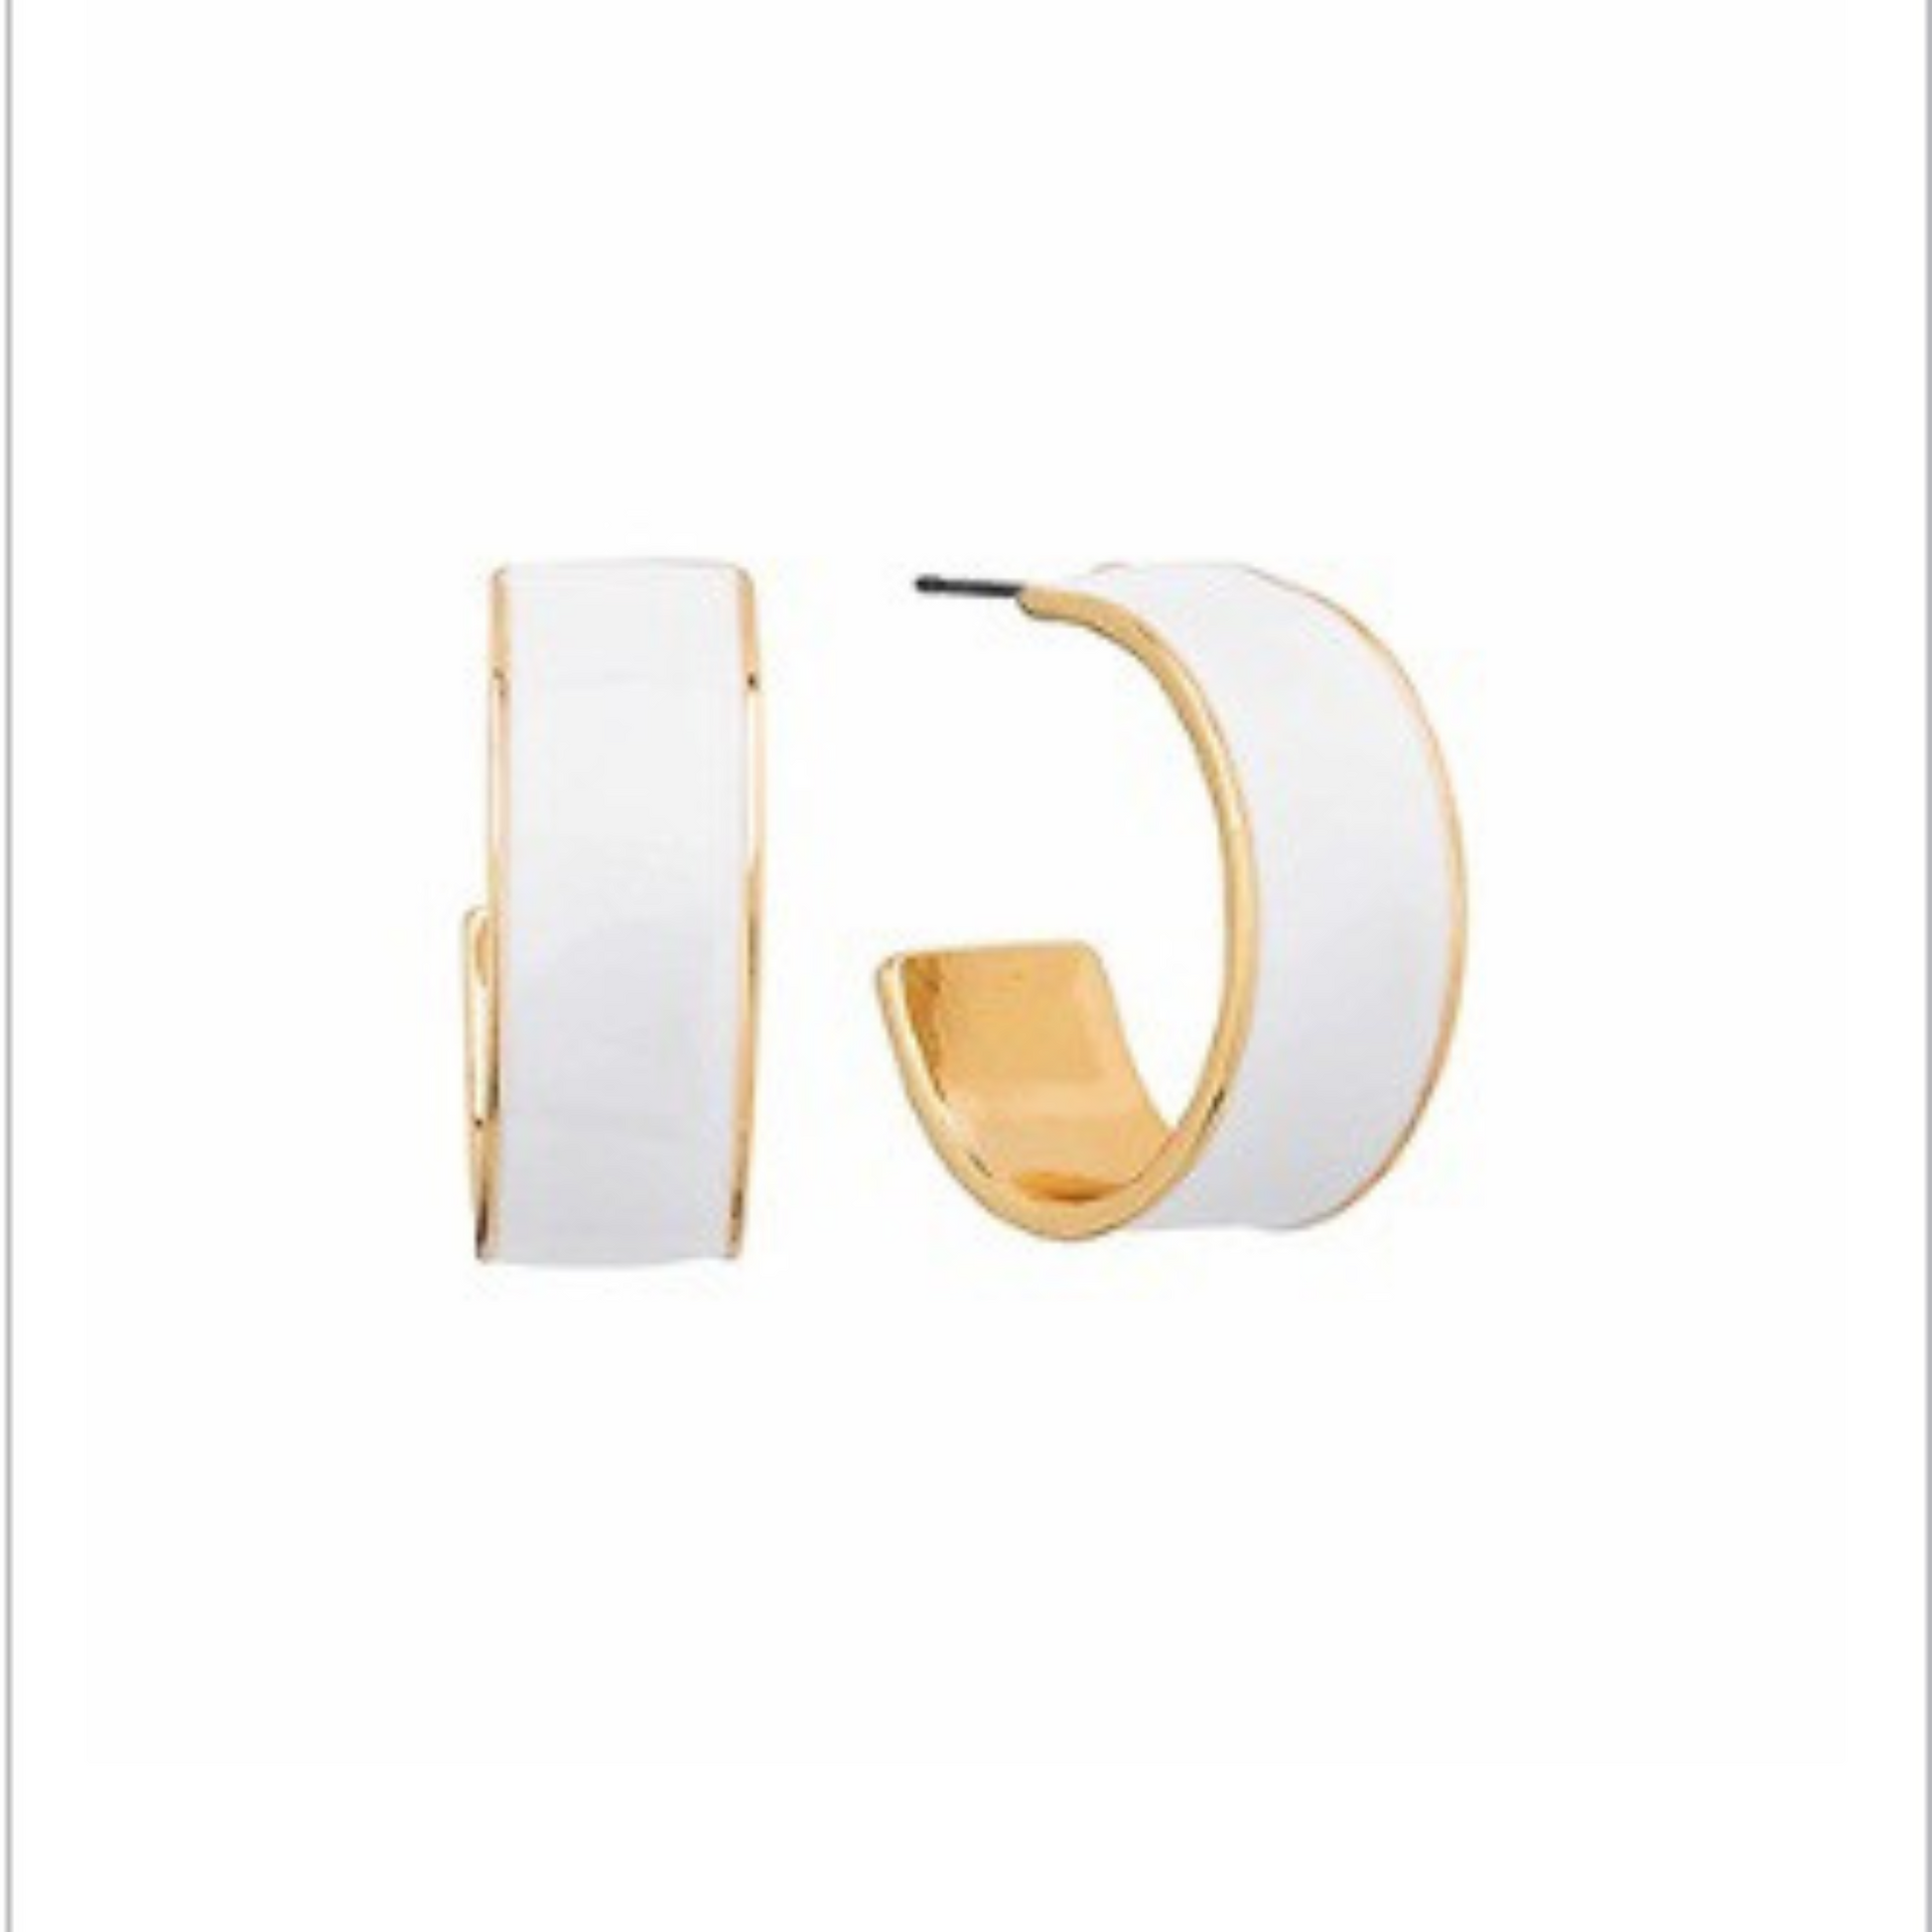 22 mm colored metal hoops in white and gold